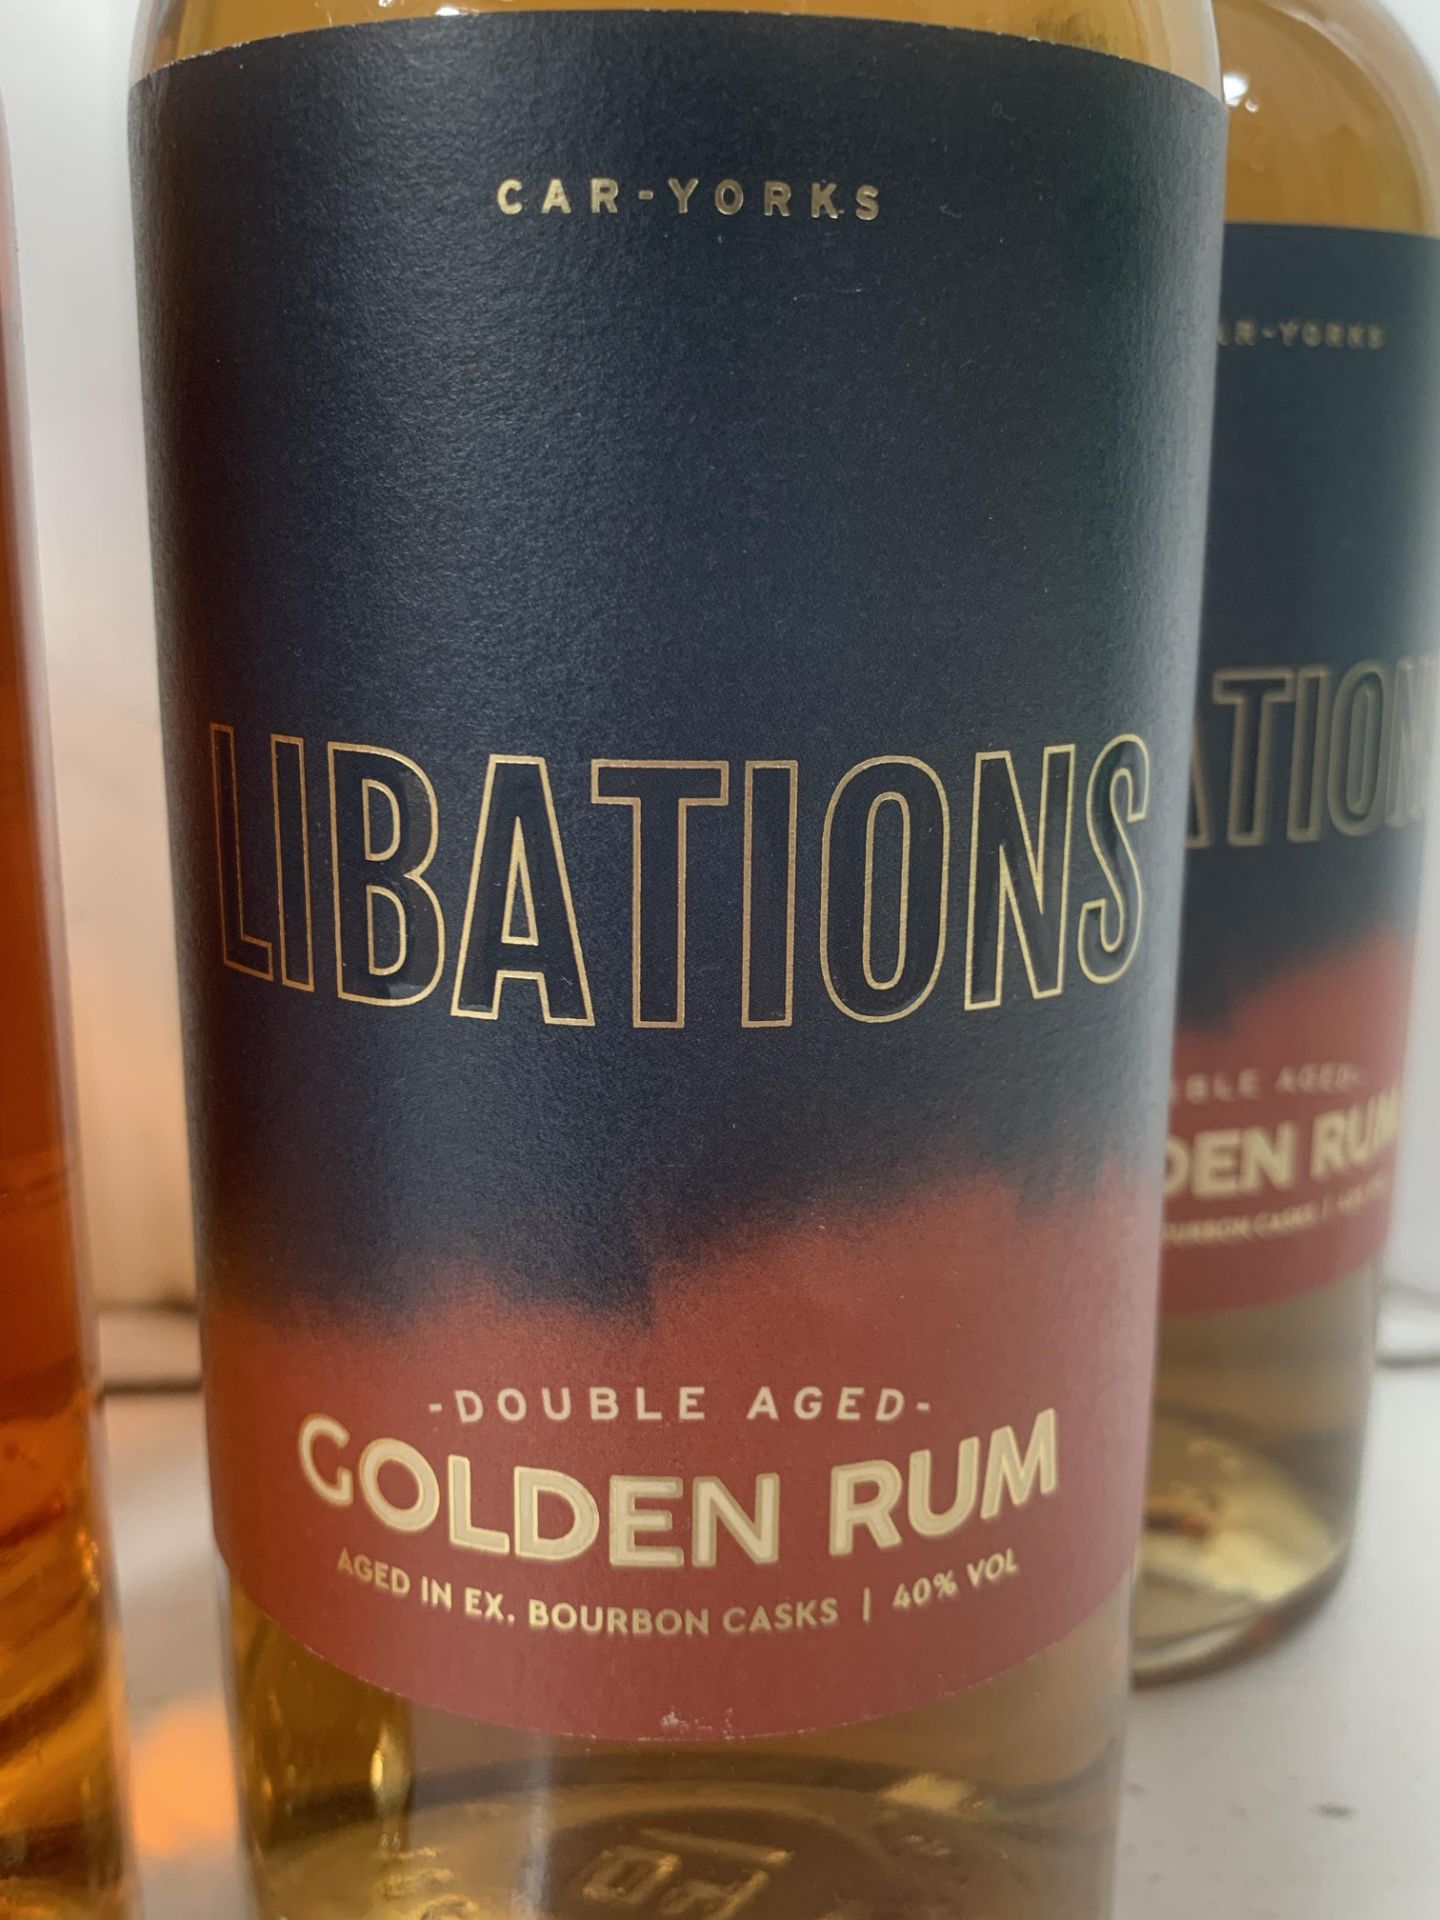 4x Bottles of Libations Rum; 2x Cask Reserve 45%, 70cl and 2x Double Aged Golden 40%, 70cl - Image 4 of 5